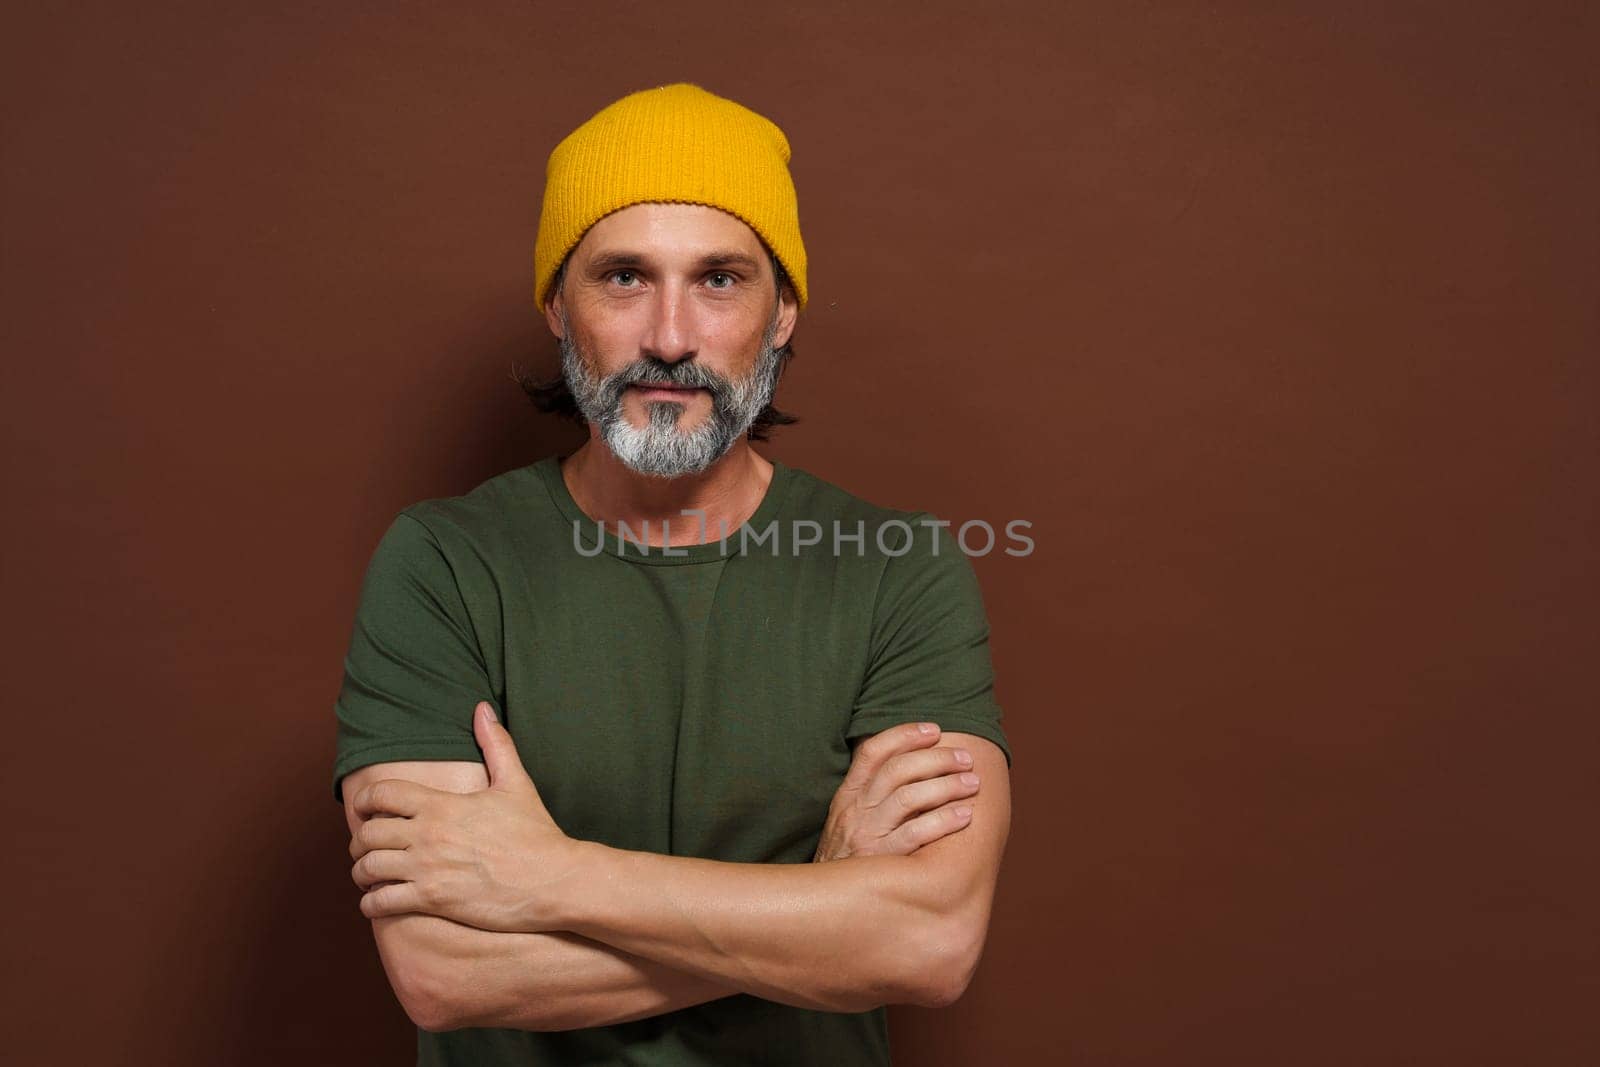 Mature, handsome man with silver beard wearing yellow hat against brown background. The image has copy space and can be used for product placement or advertising concepts. by LipikStockMedia